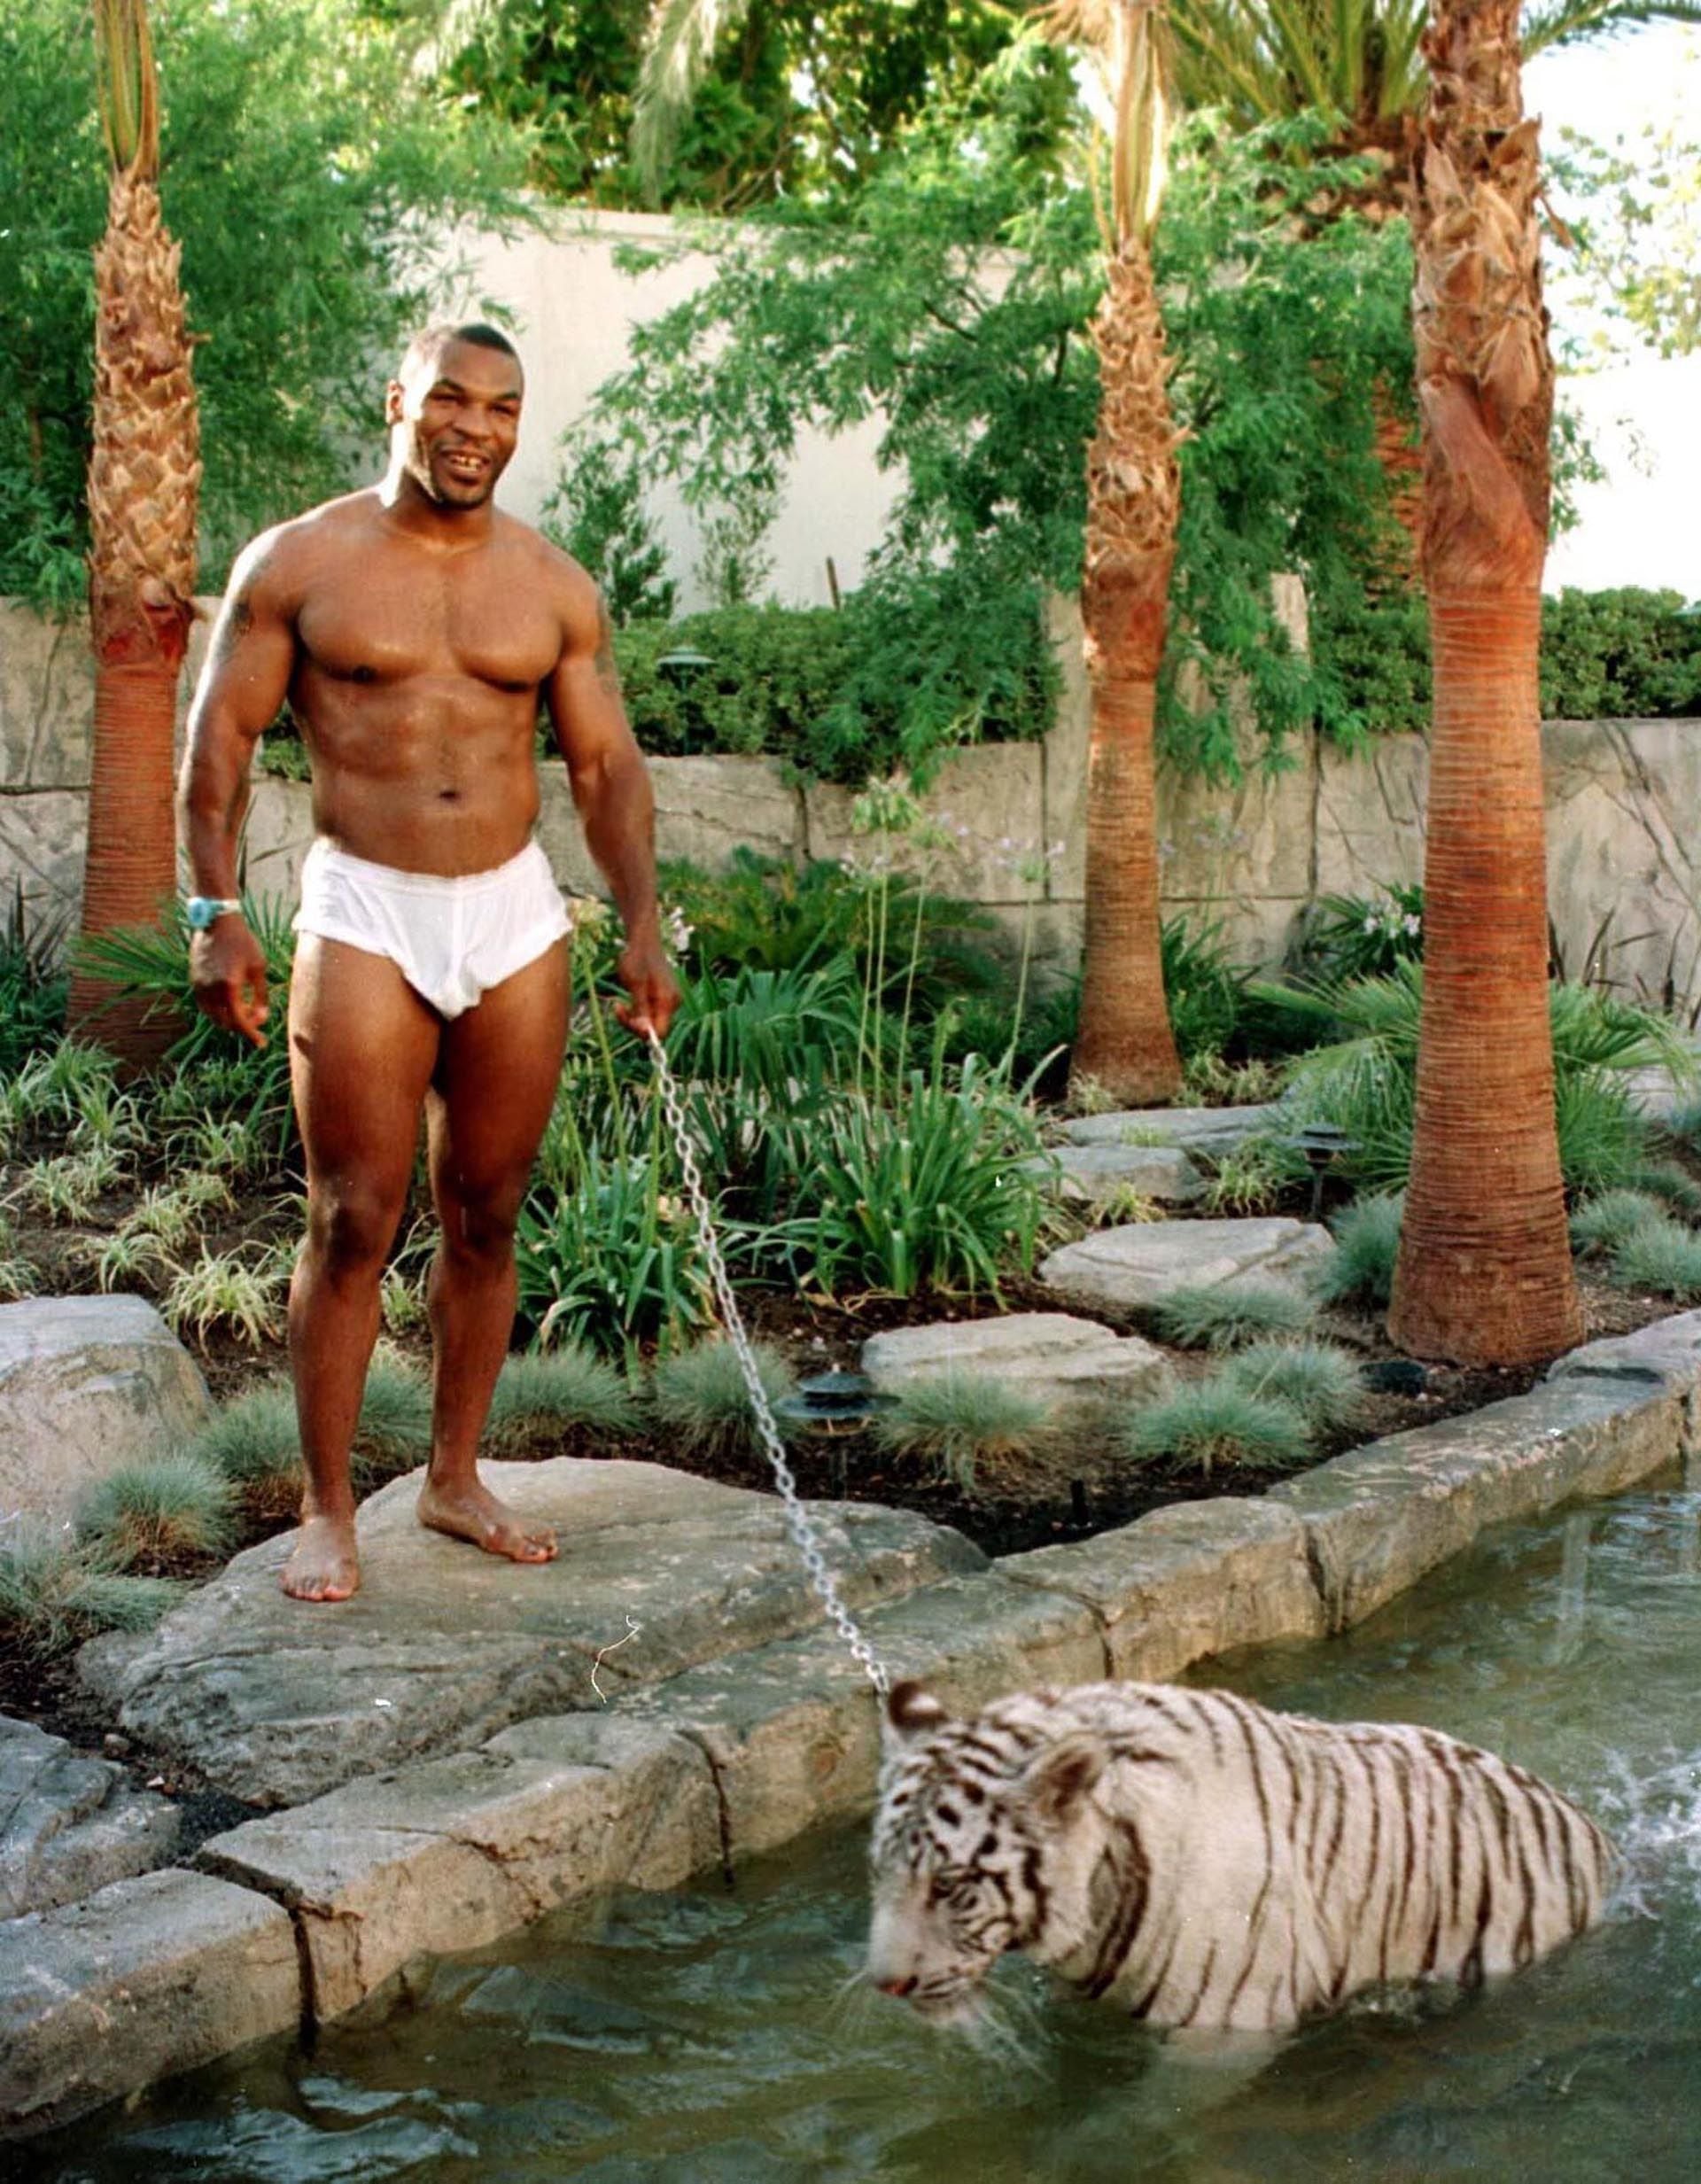 How Did Mike Tyson Buy His Tigers?